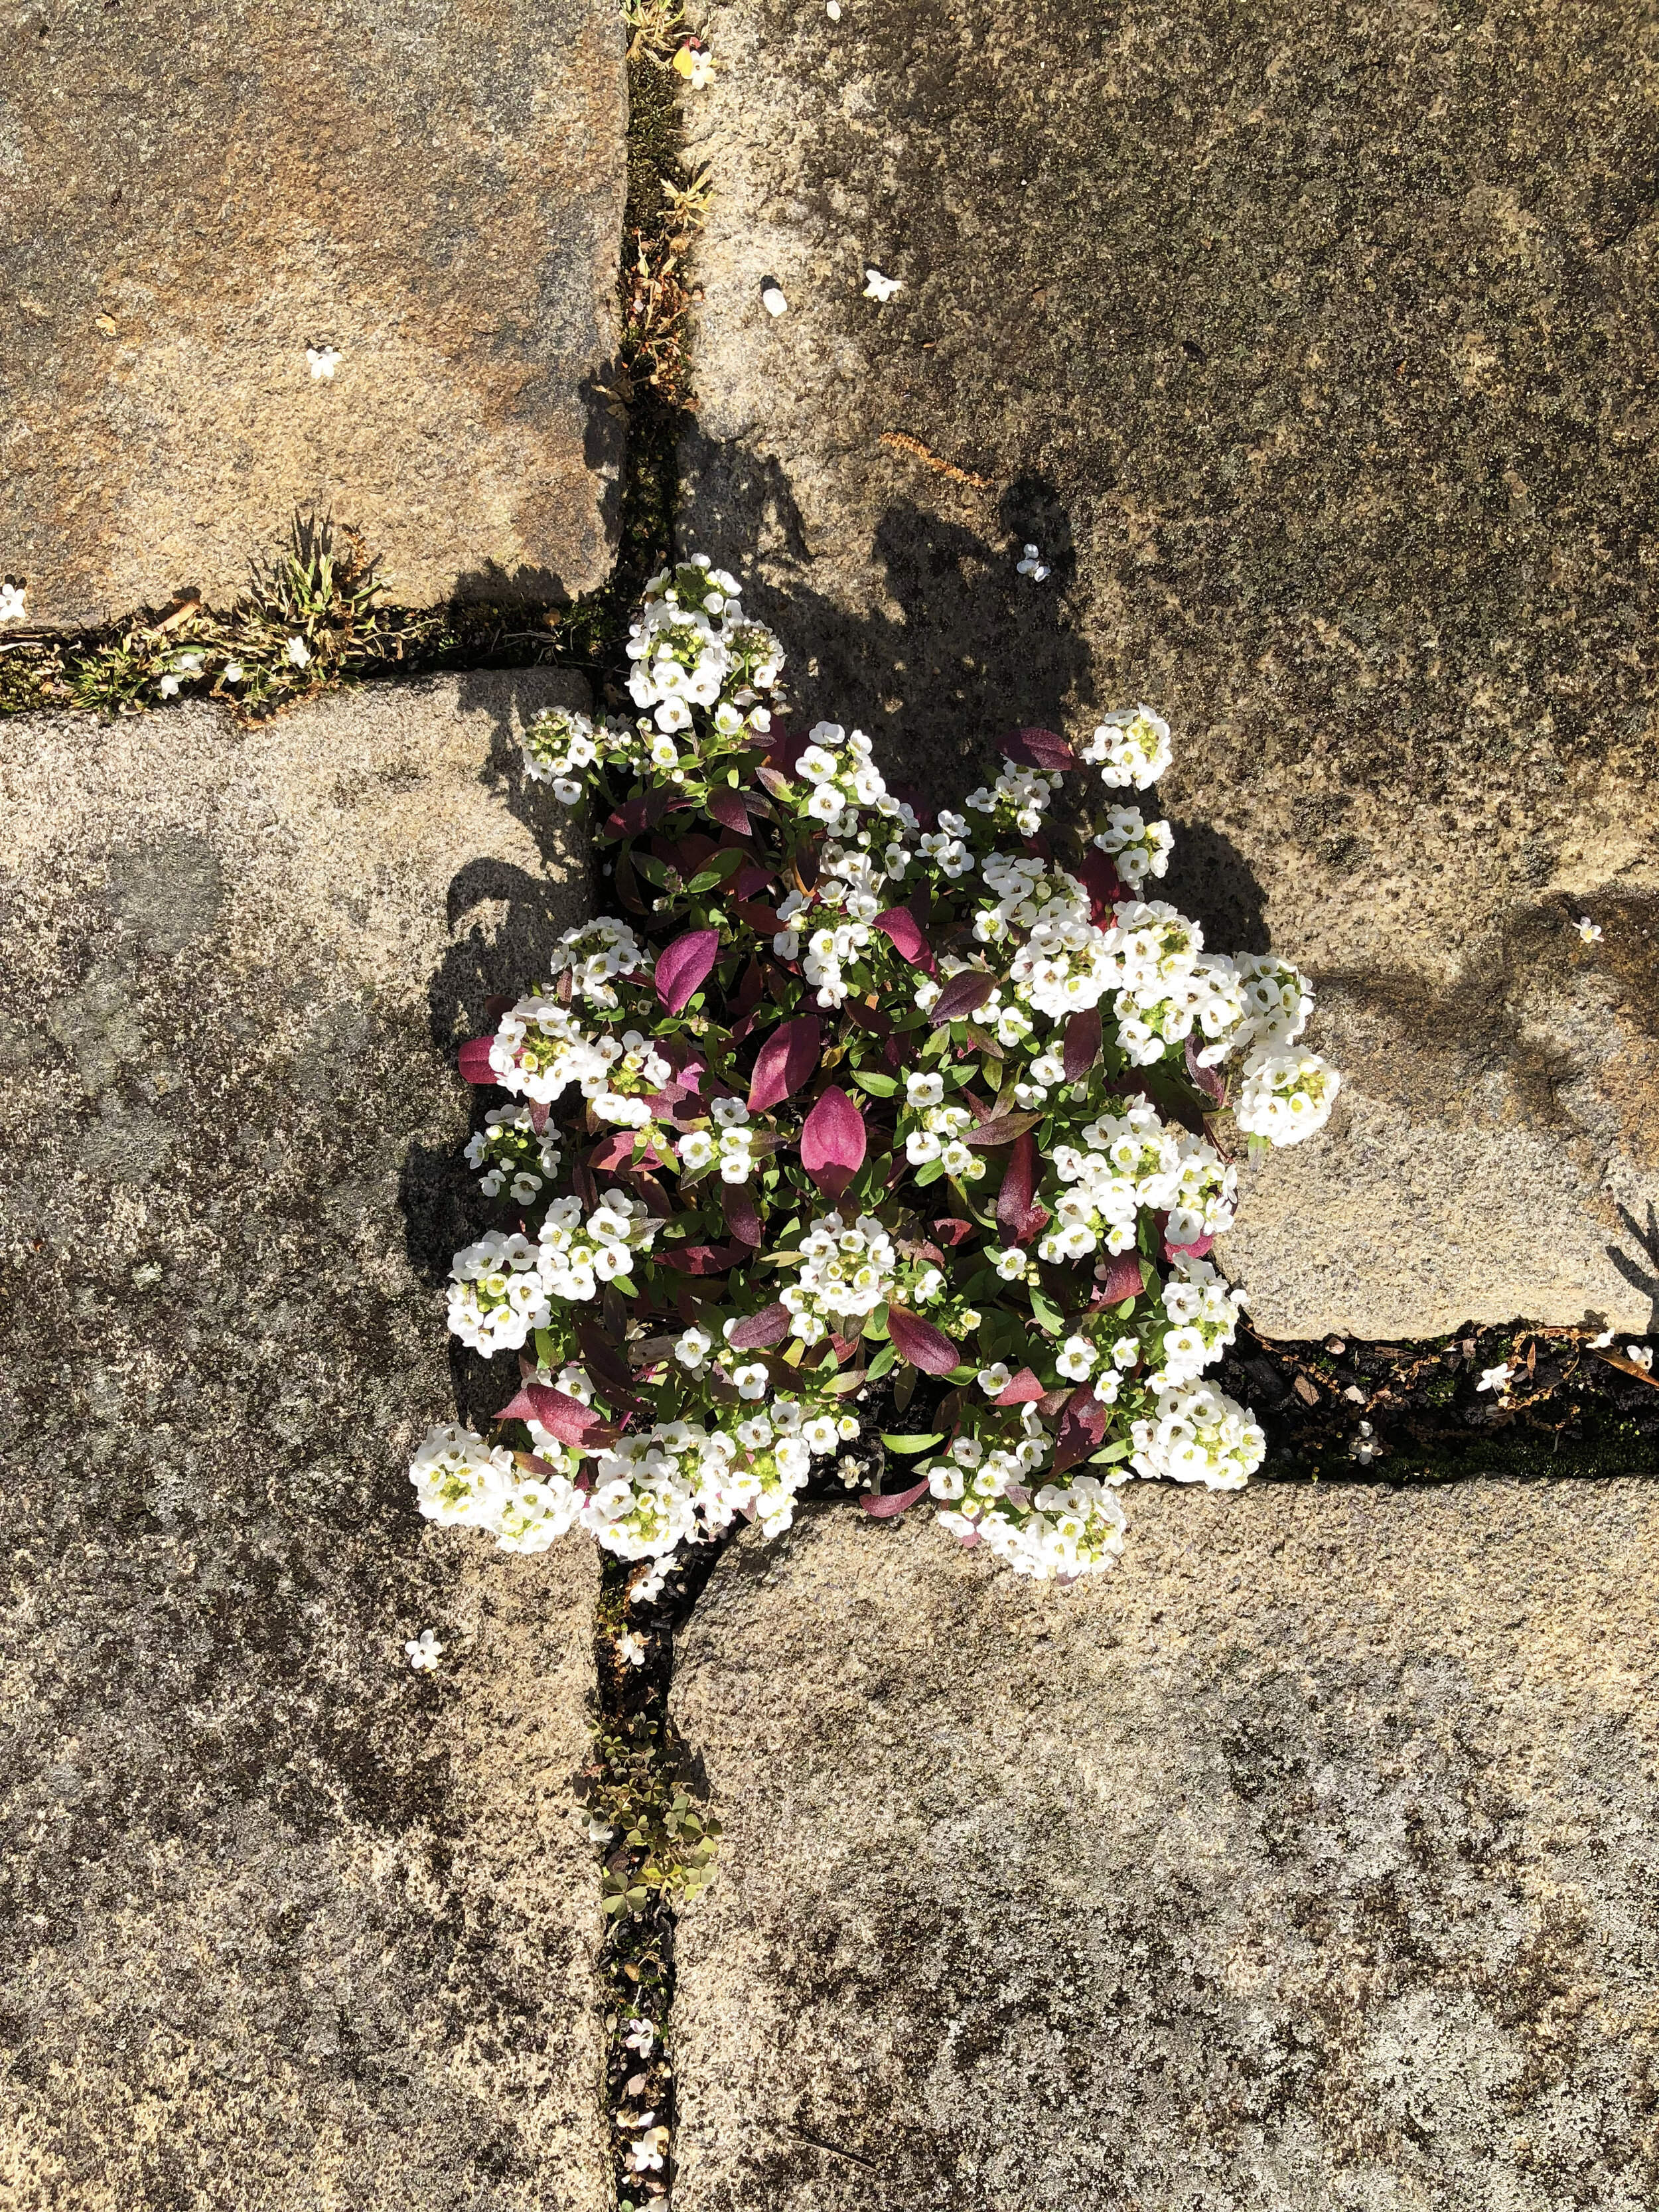   In the spring, Mrs. Mellon tucked Sweet alyssum into pockets in the paving stones of terraces here at Oak Spring. This technique was used in many gardens she designed for others as well and is a signature of her unique style. As spring leads to sum